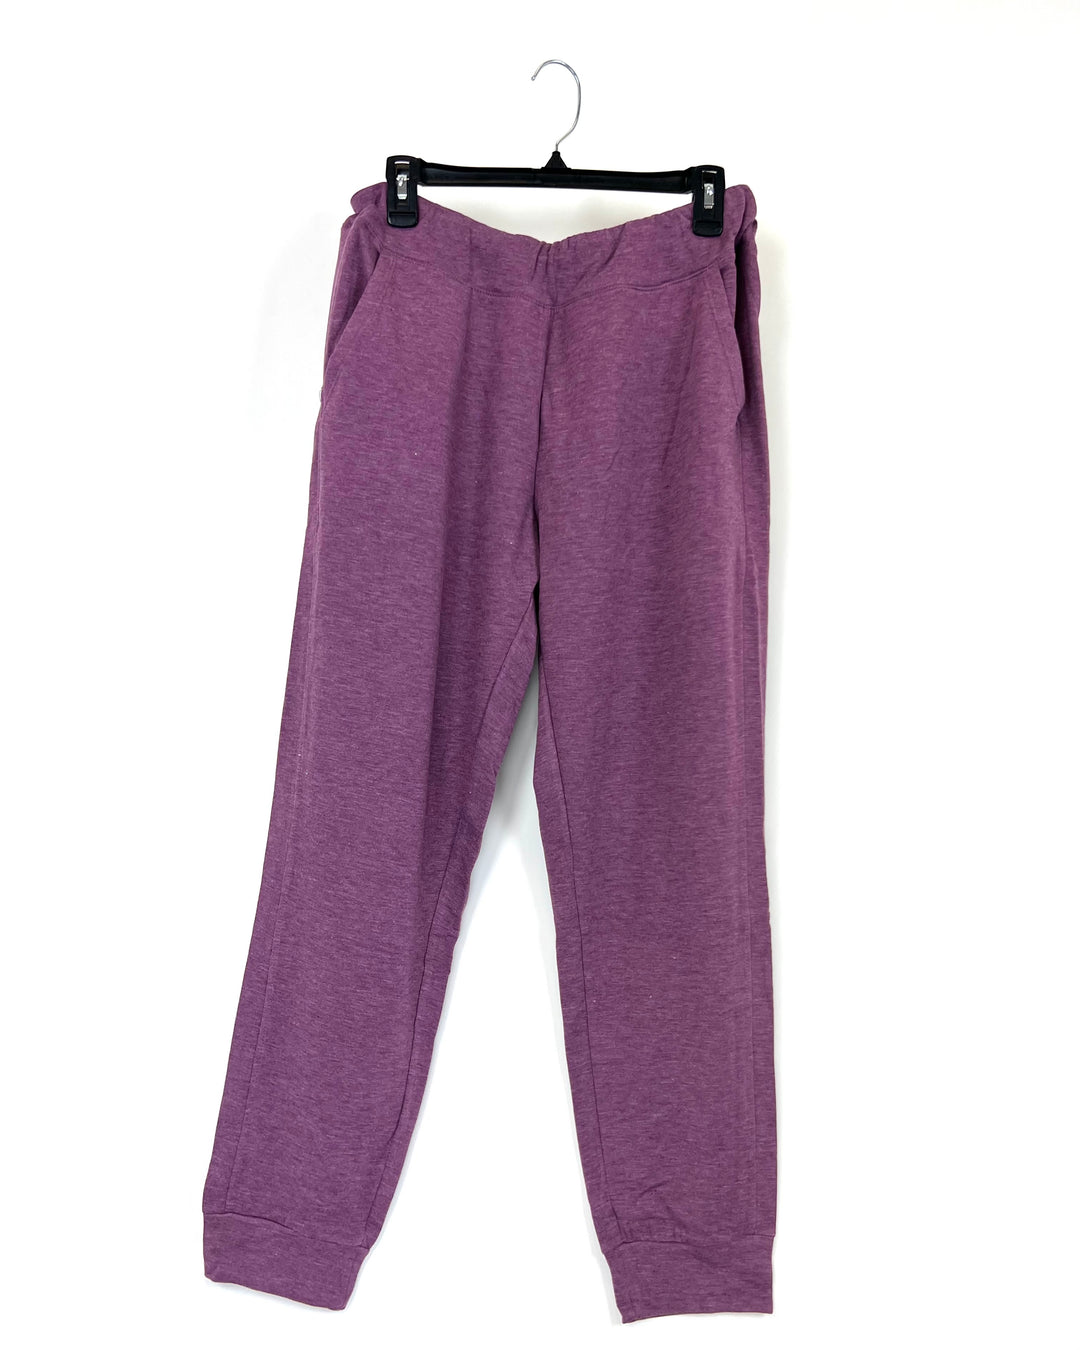 Heathered Purple Joggers - Size 6/8 and 10/12